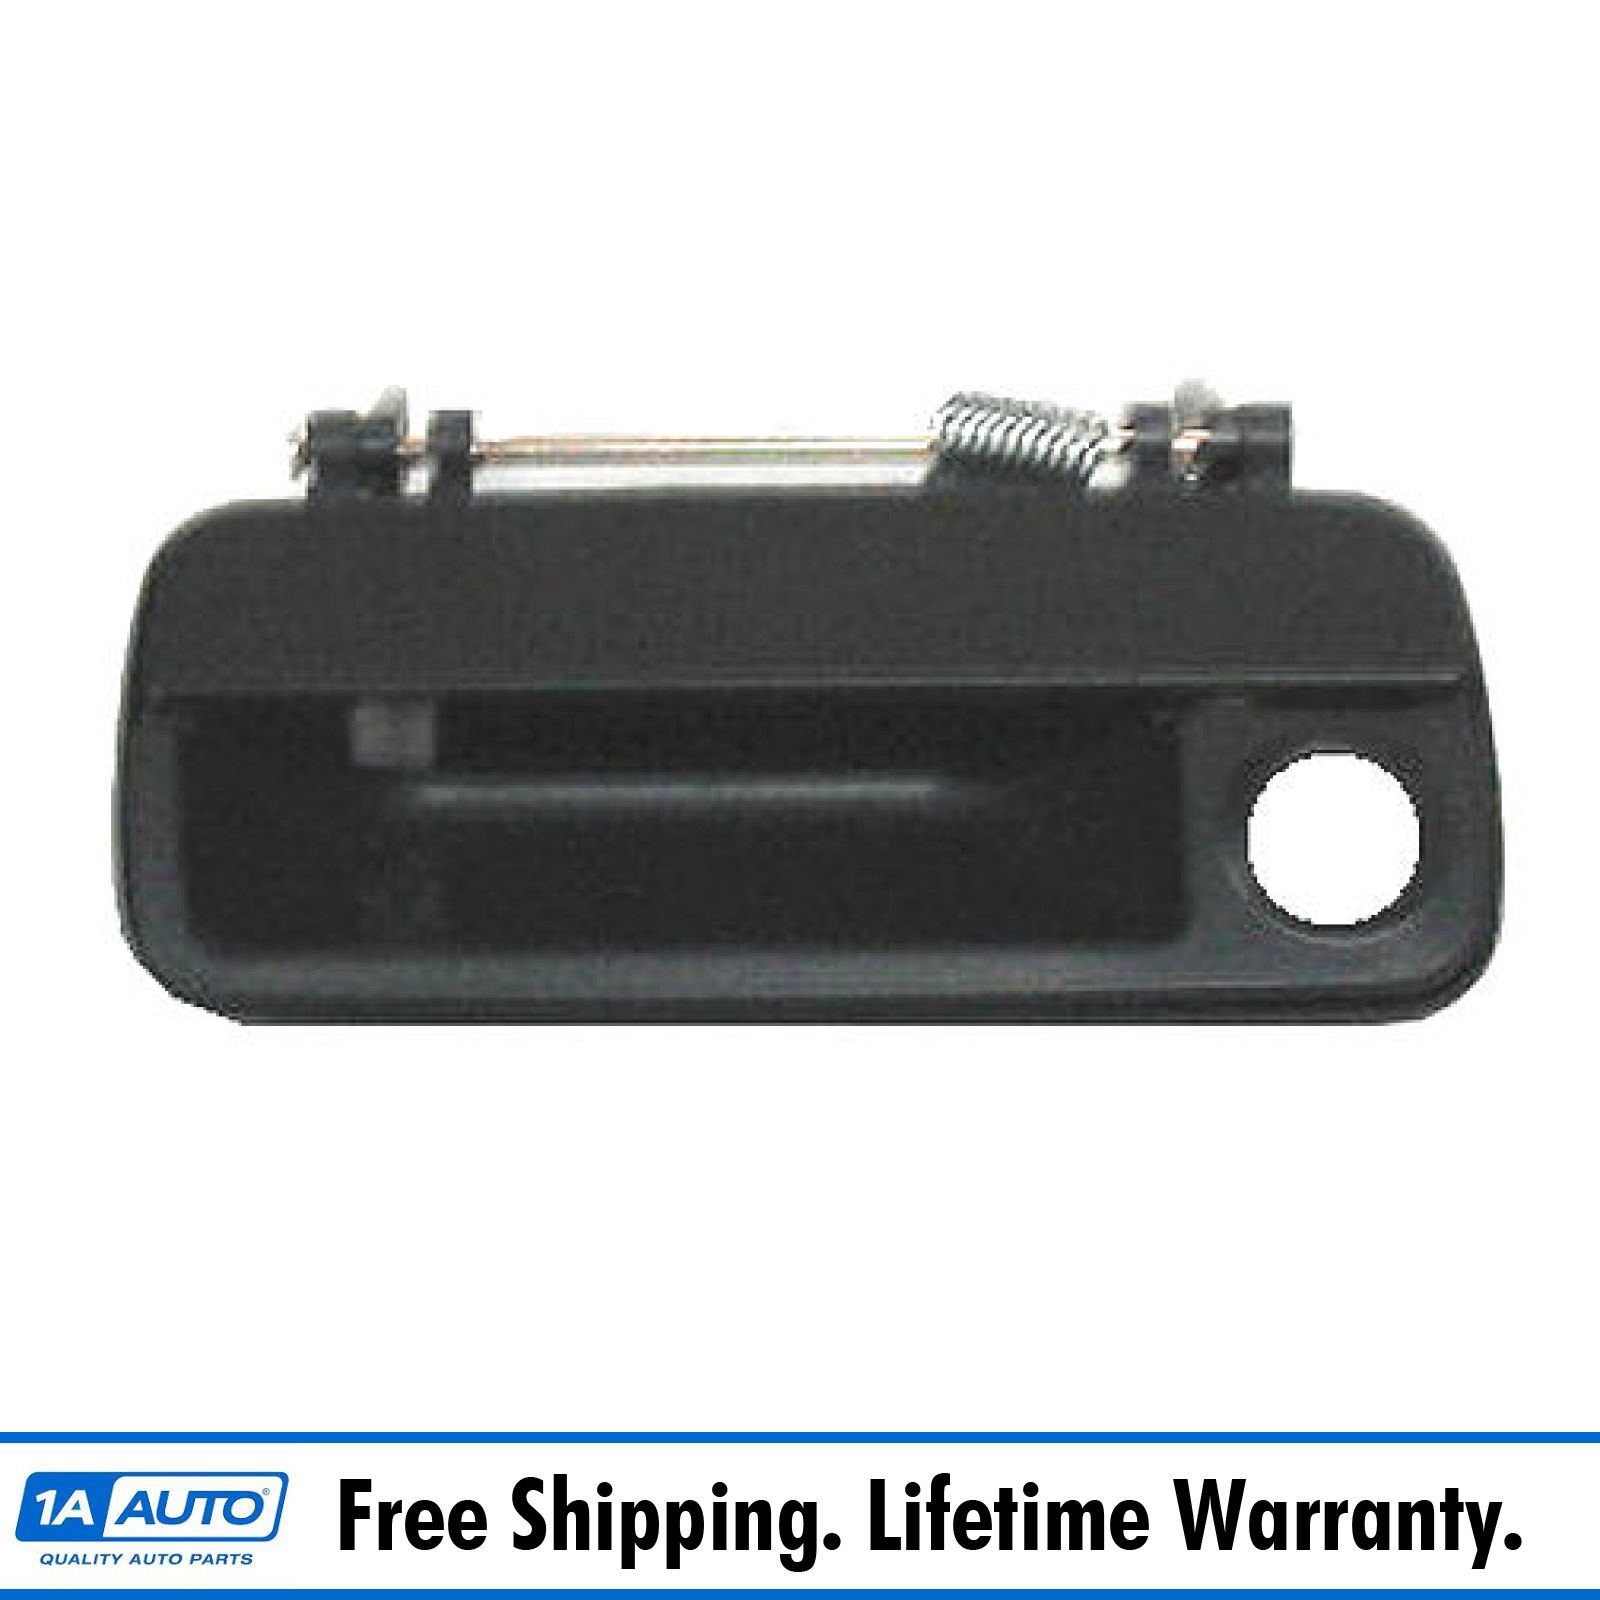 Front,Left Driver Side DOOR OUTER HANDLE For Oldsmobile,Buick,Pontiac,Cadillac